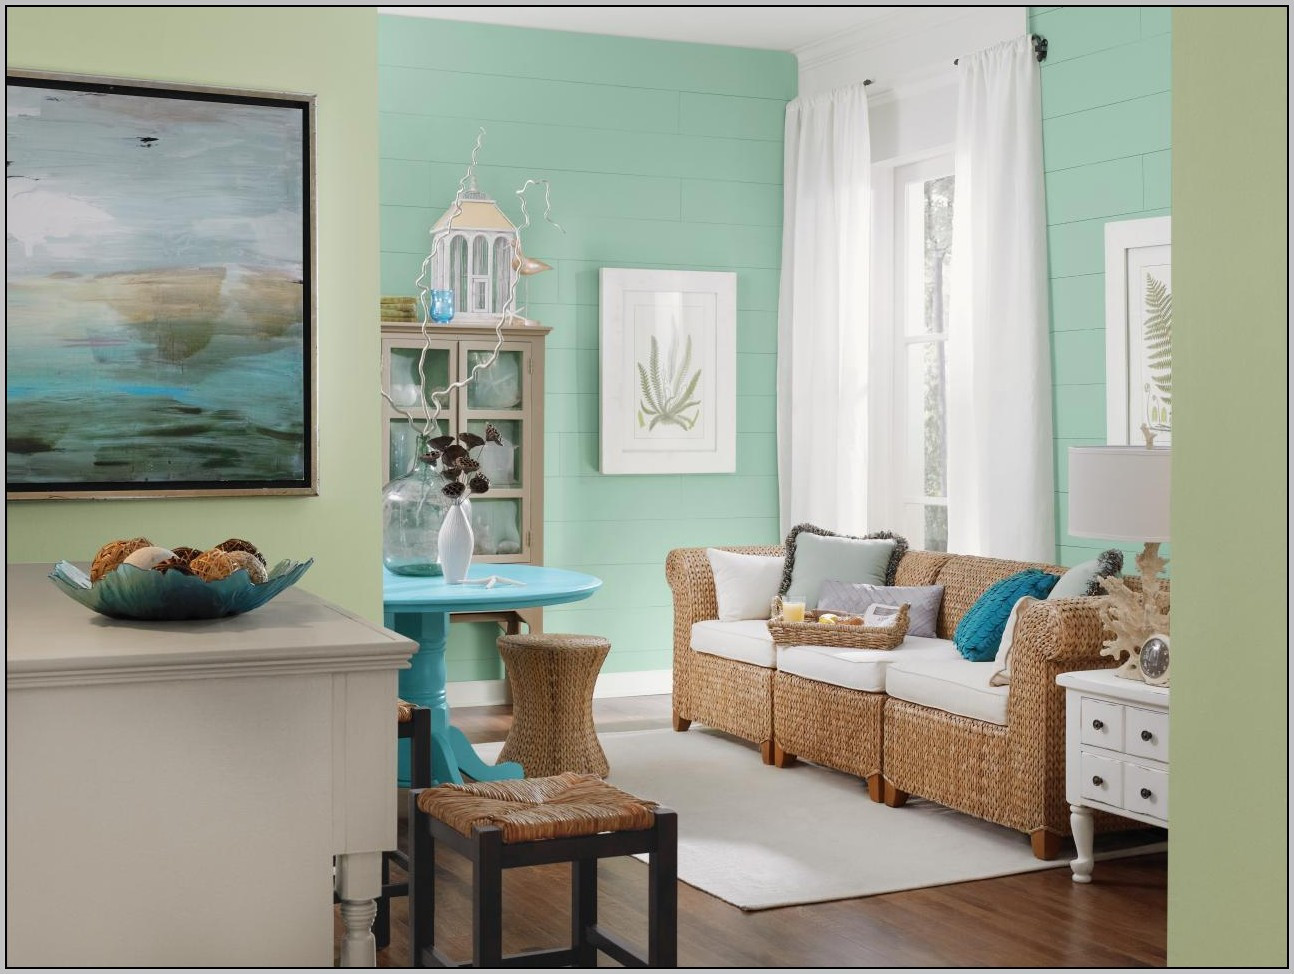 Living Room Paint Colors Pictures
 Are the Living Room Paint Colors Really Important